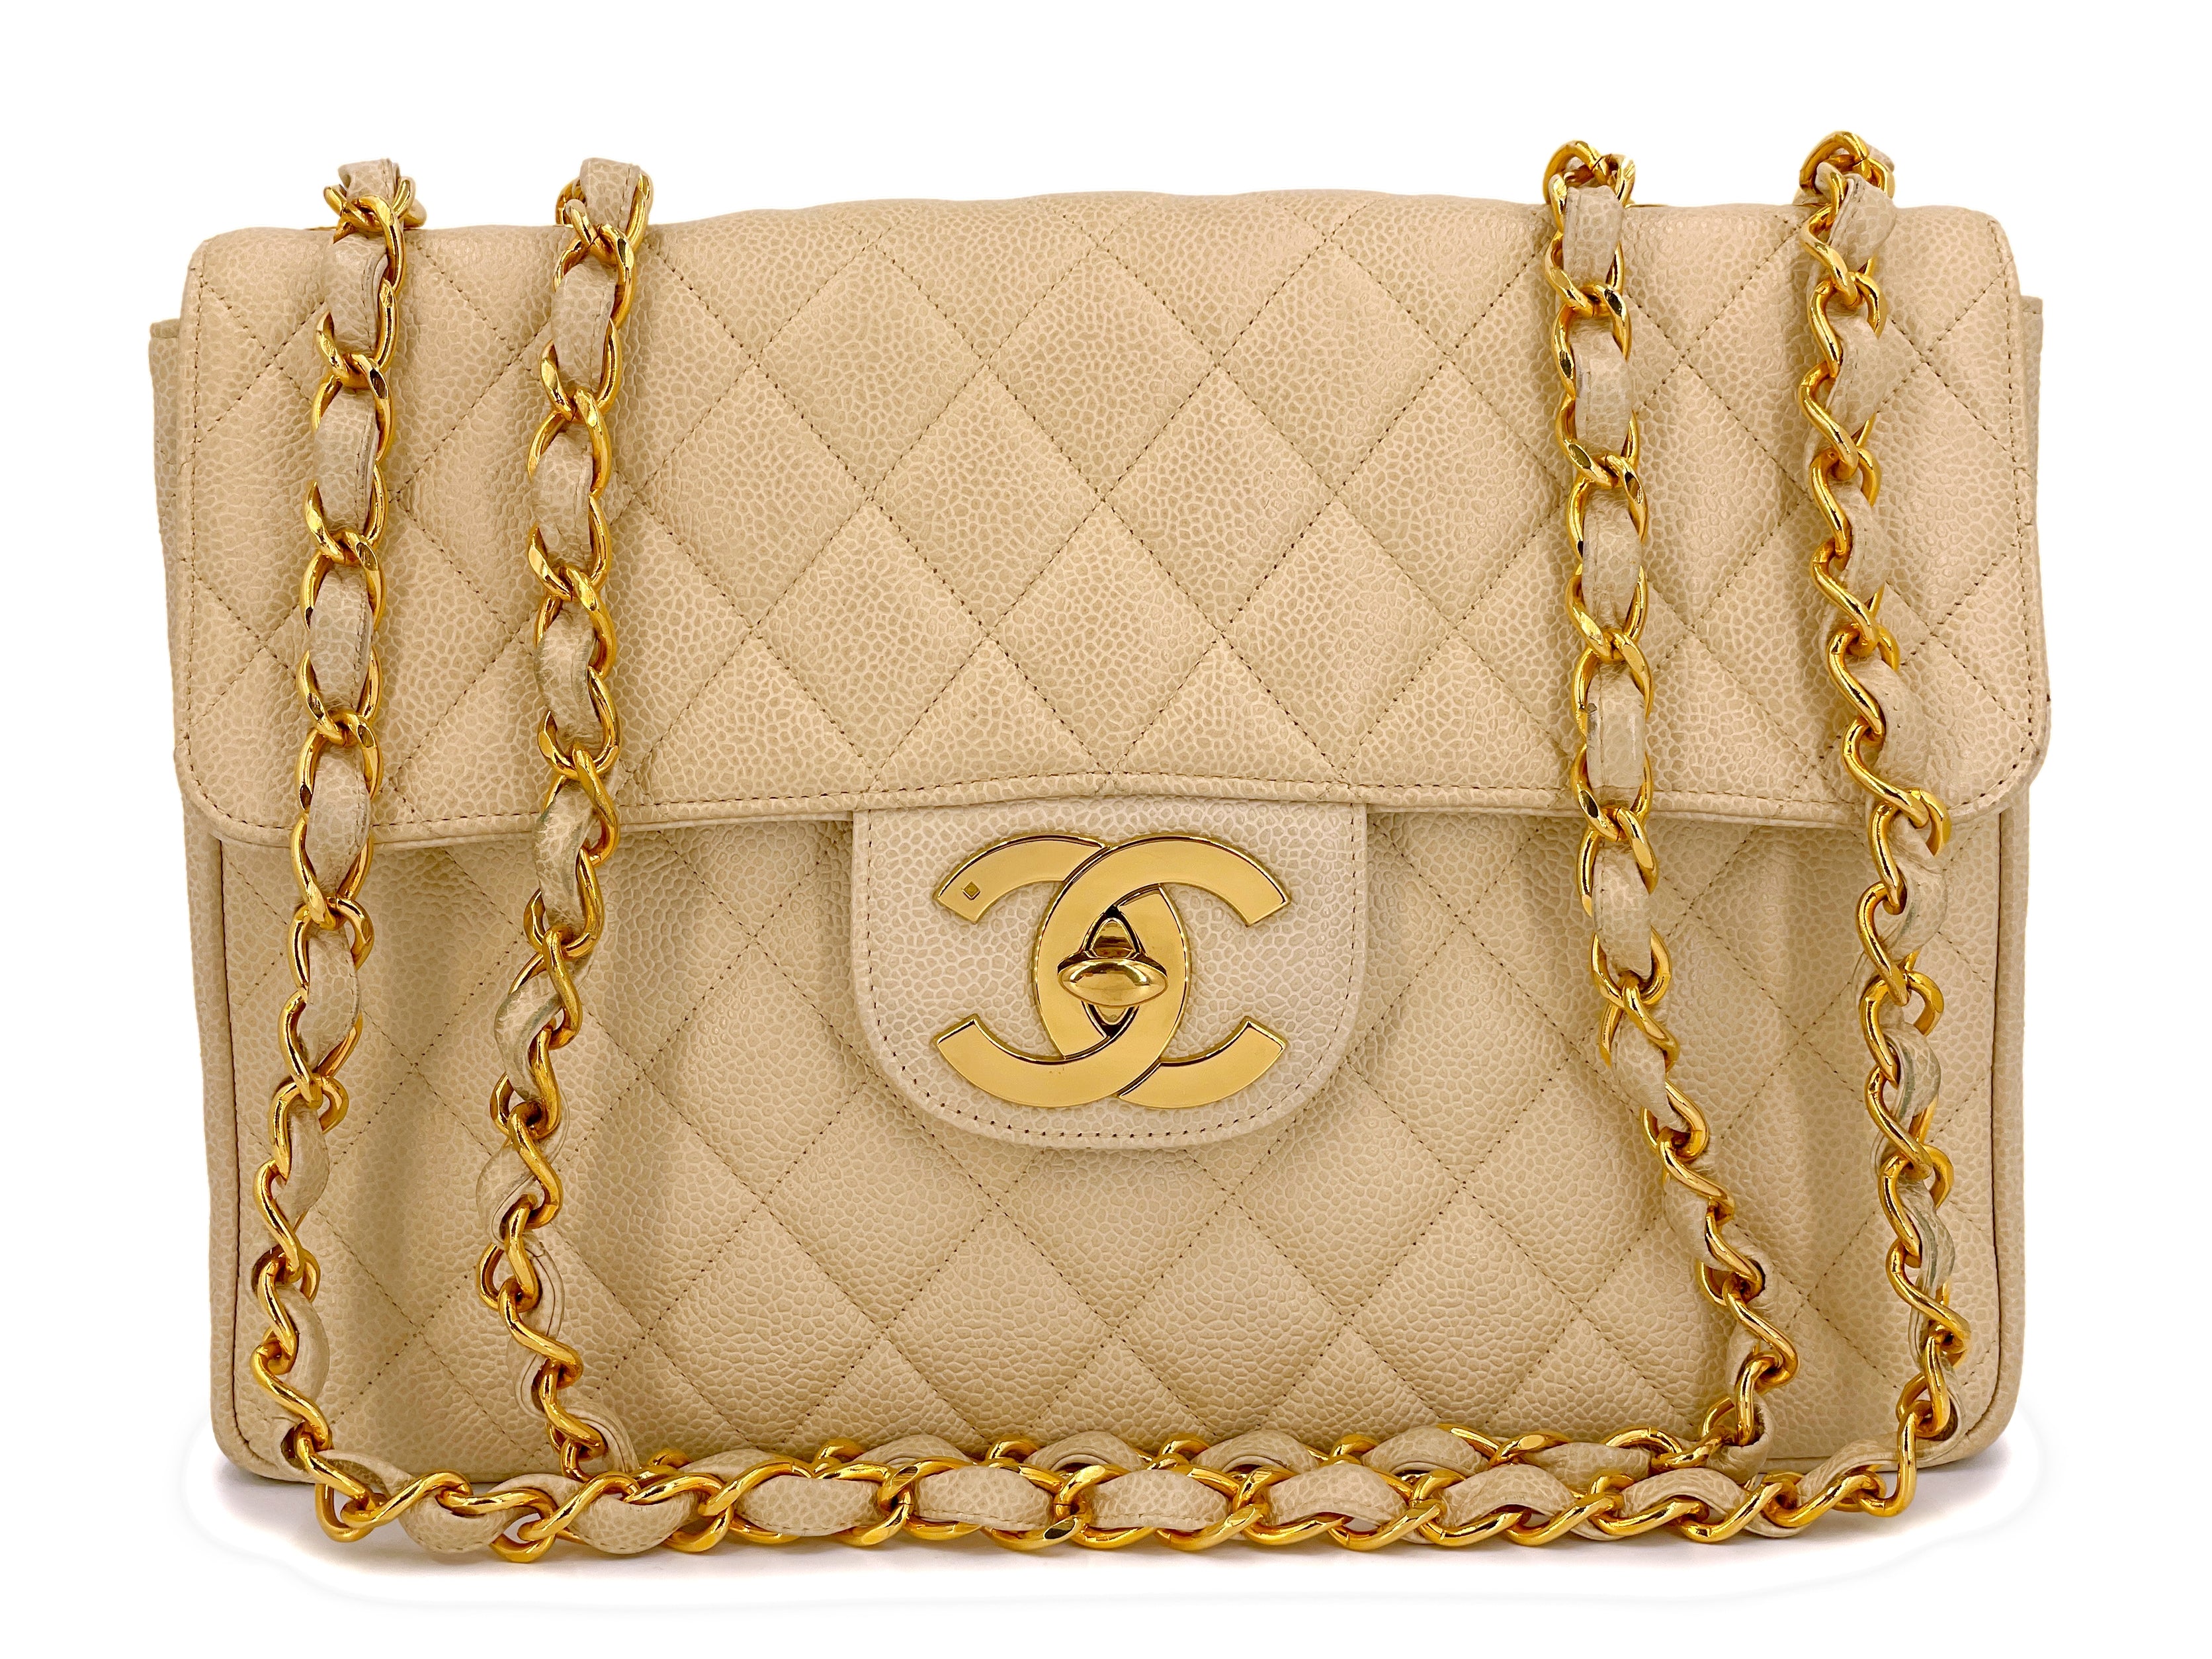 yellow quilted chanel bag